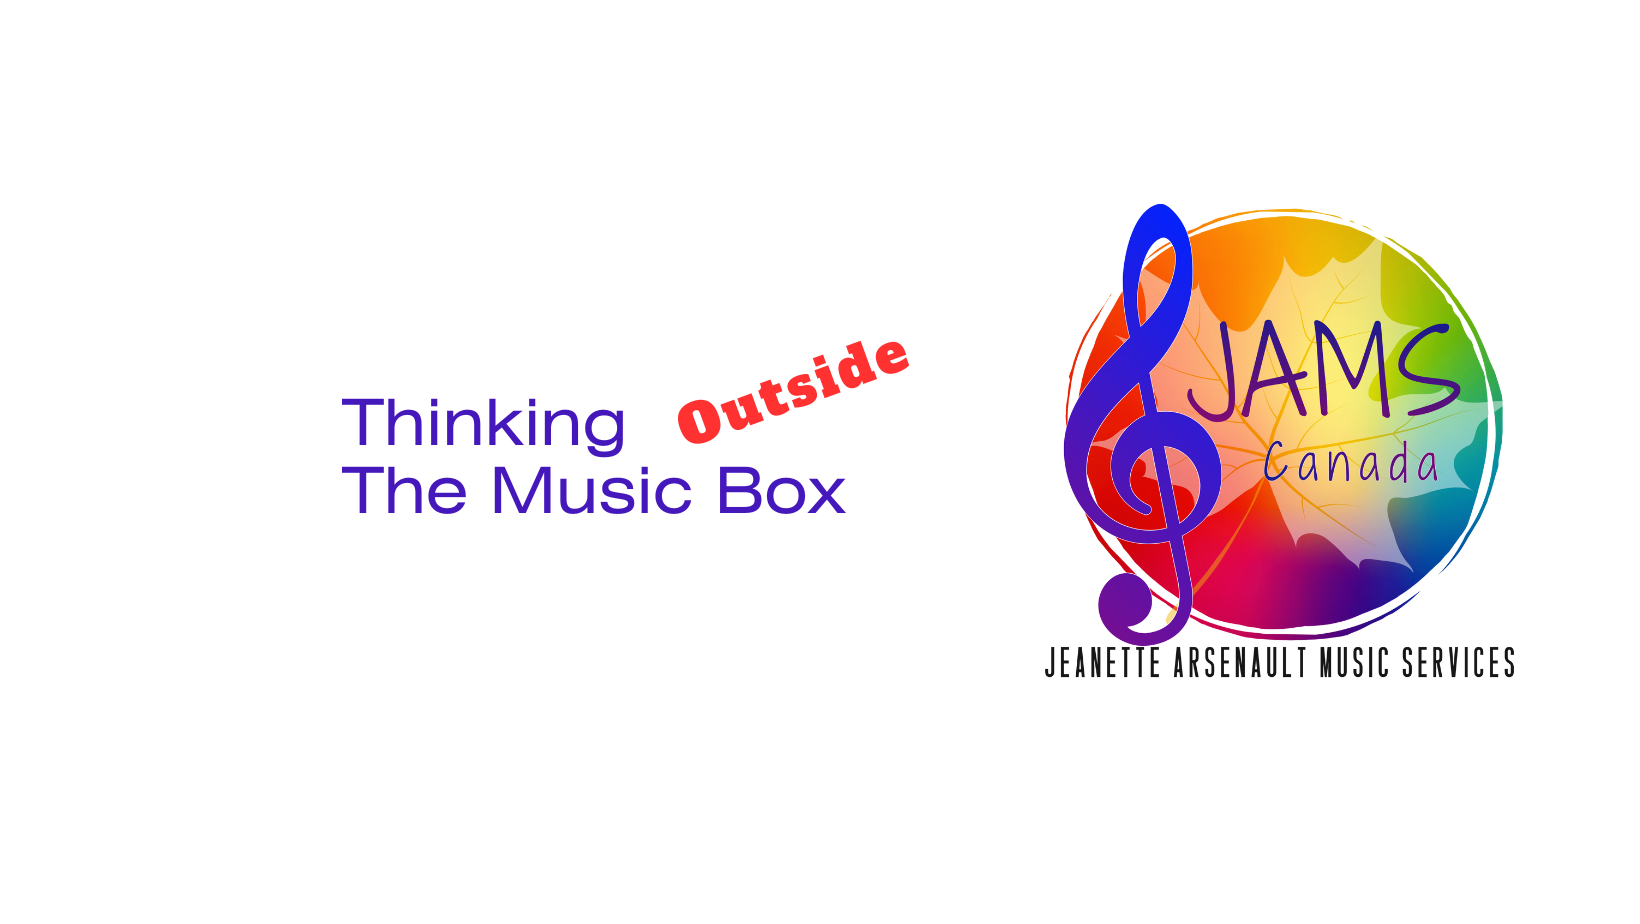 JAMS Canada - Jeanette Arsenault Music Services